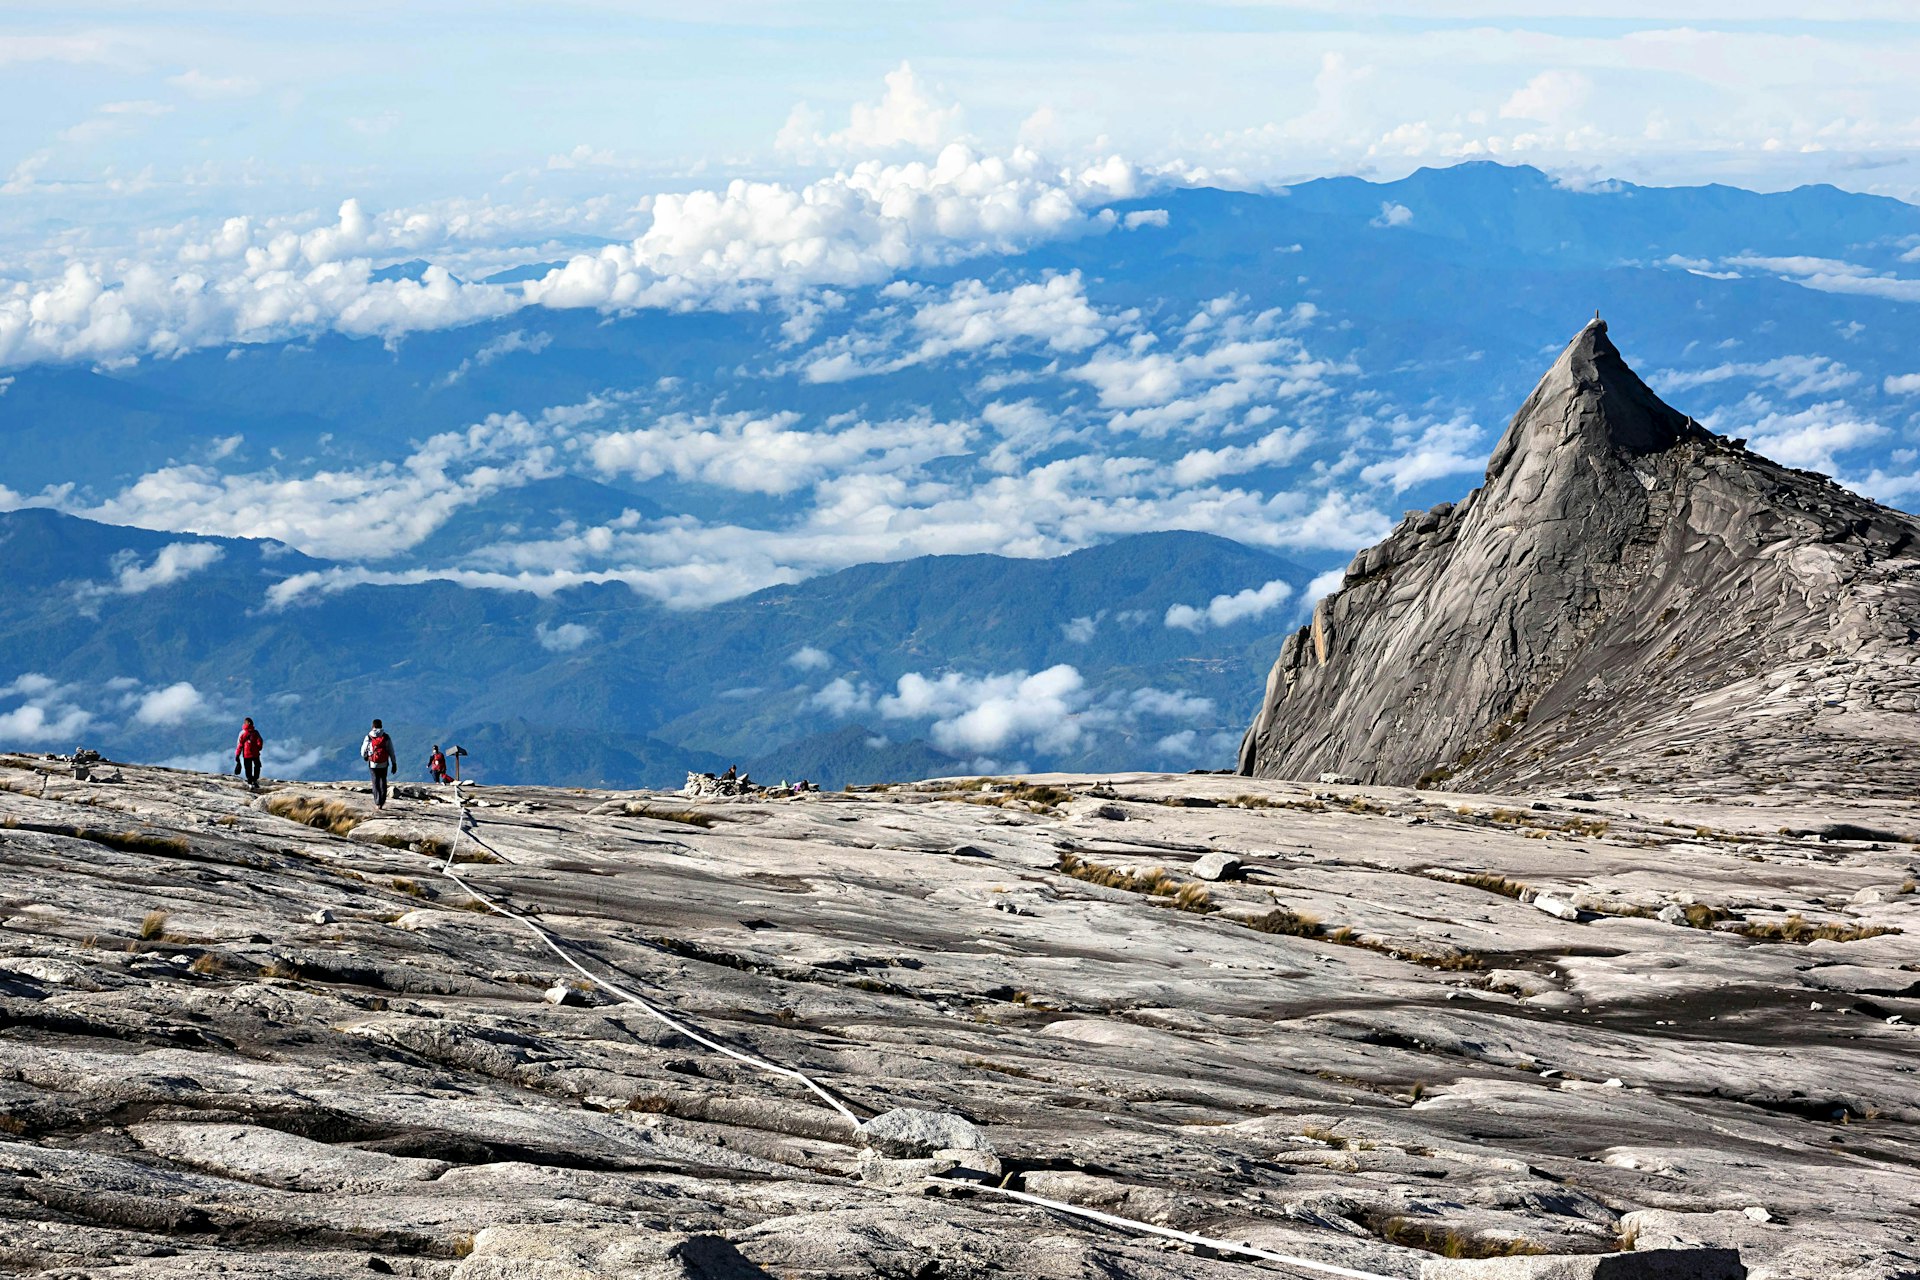 The summit of Mount Kinabalu, with jagged rock formations and a spectacular view over cloud-covered peaks